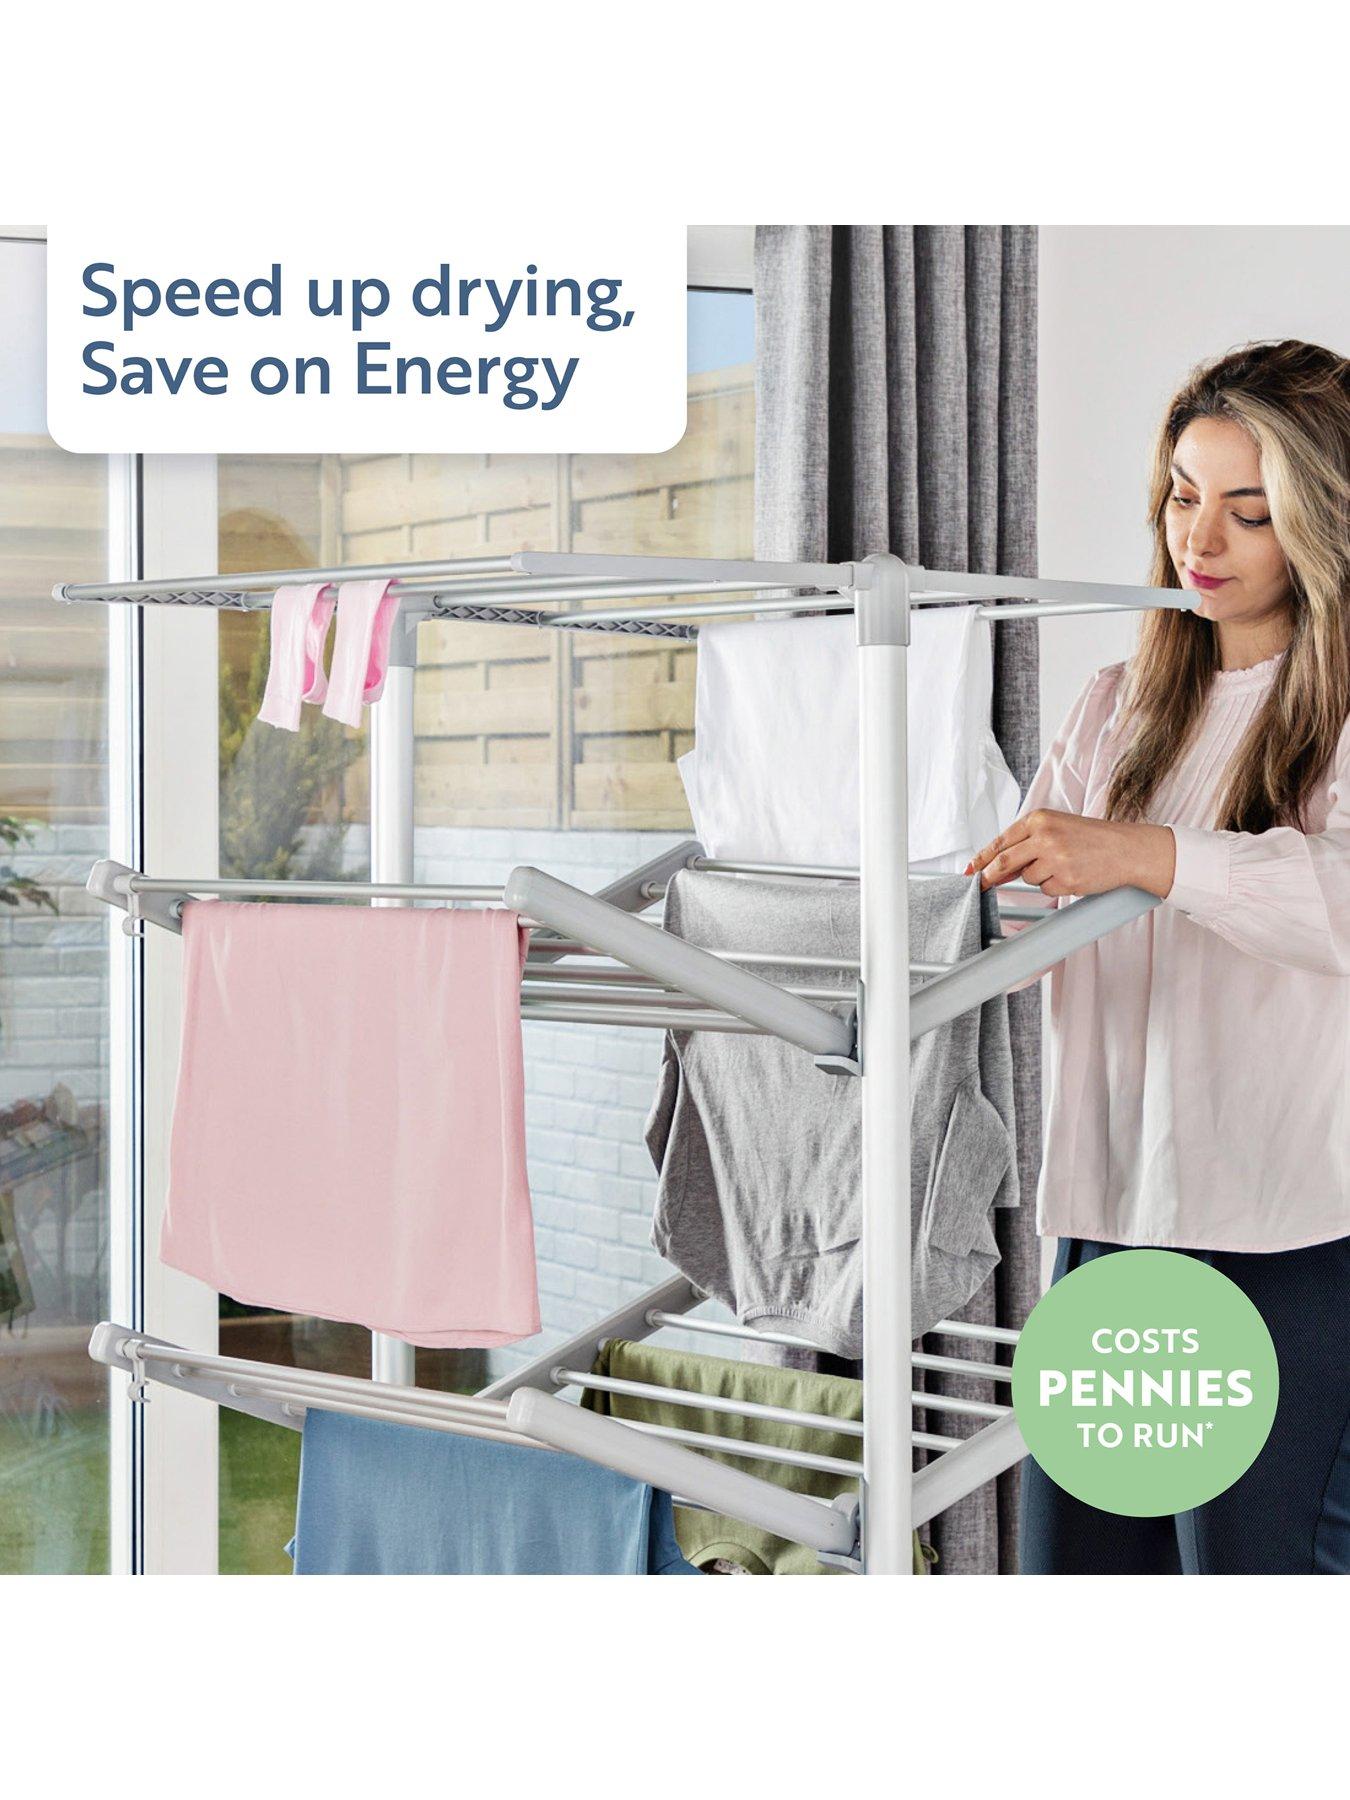 Dry:Soon Mini 3-Tier Heated Clothes Airer & Cover